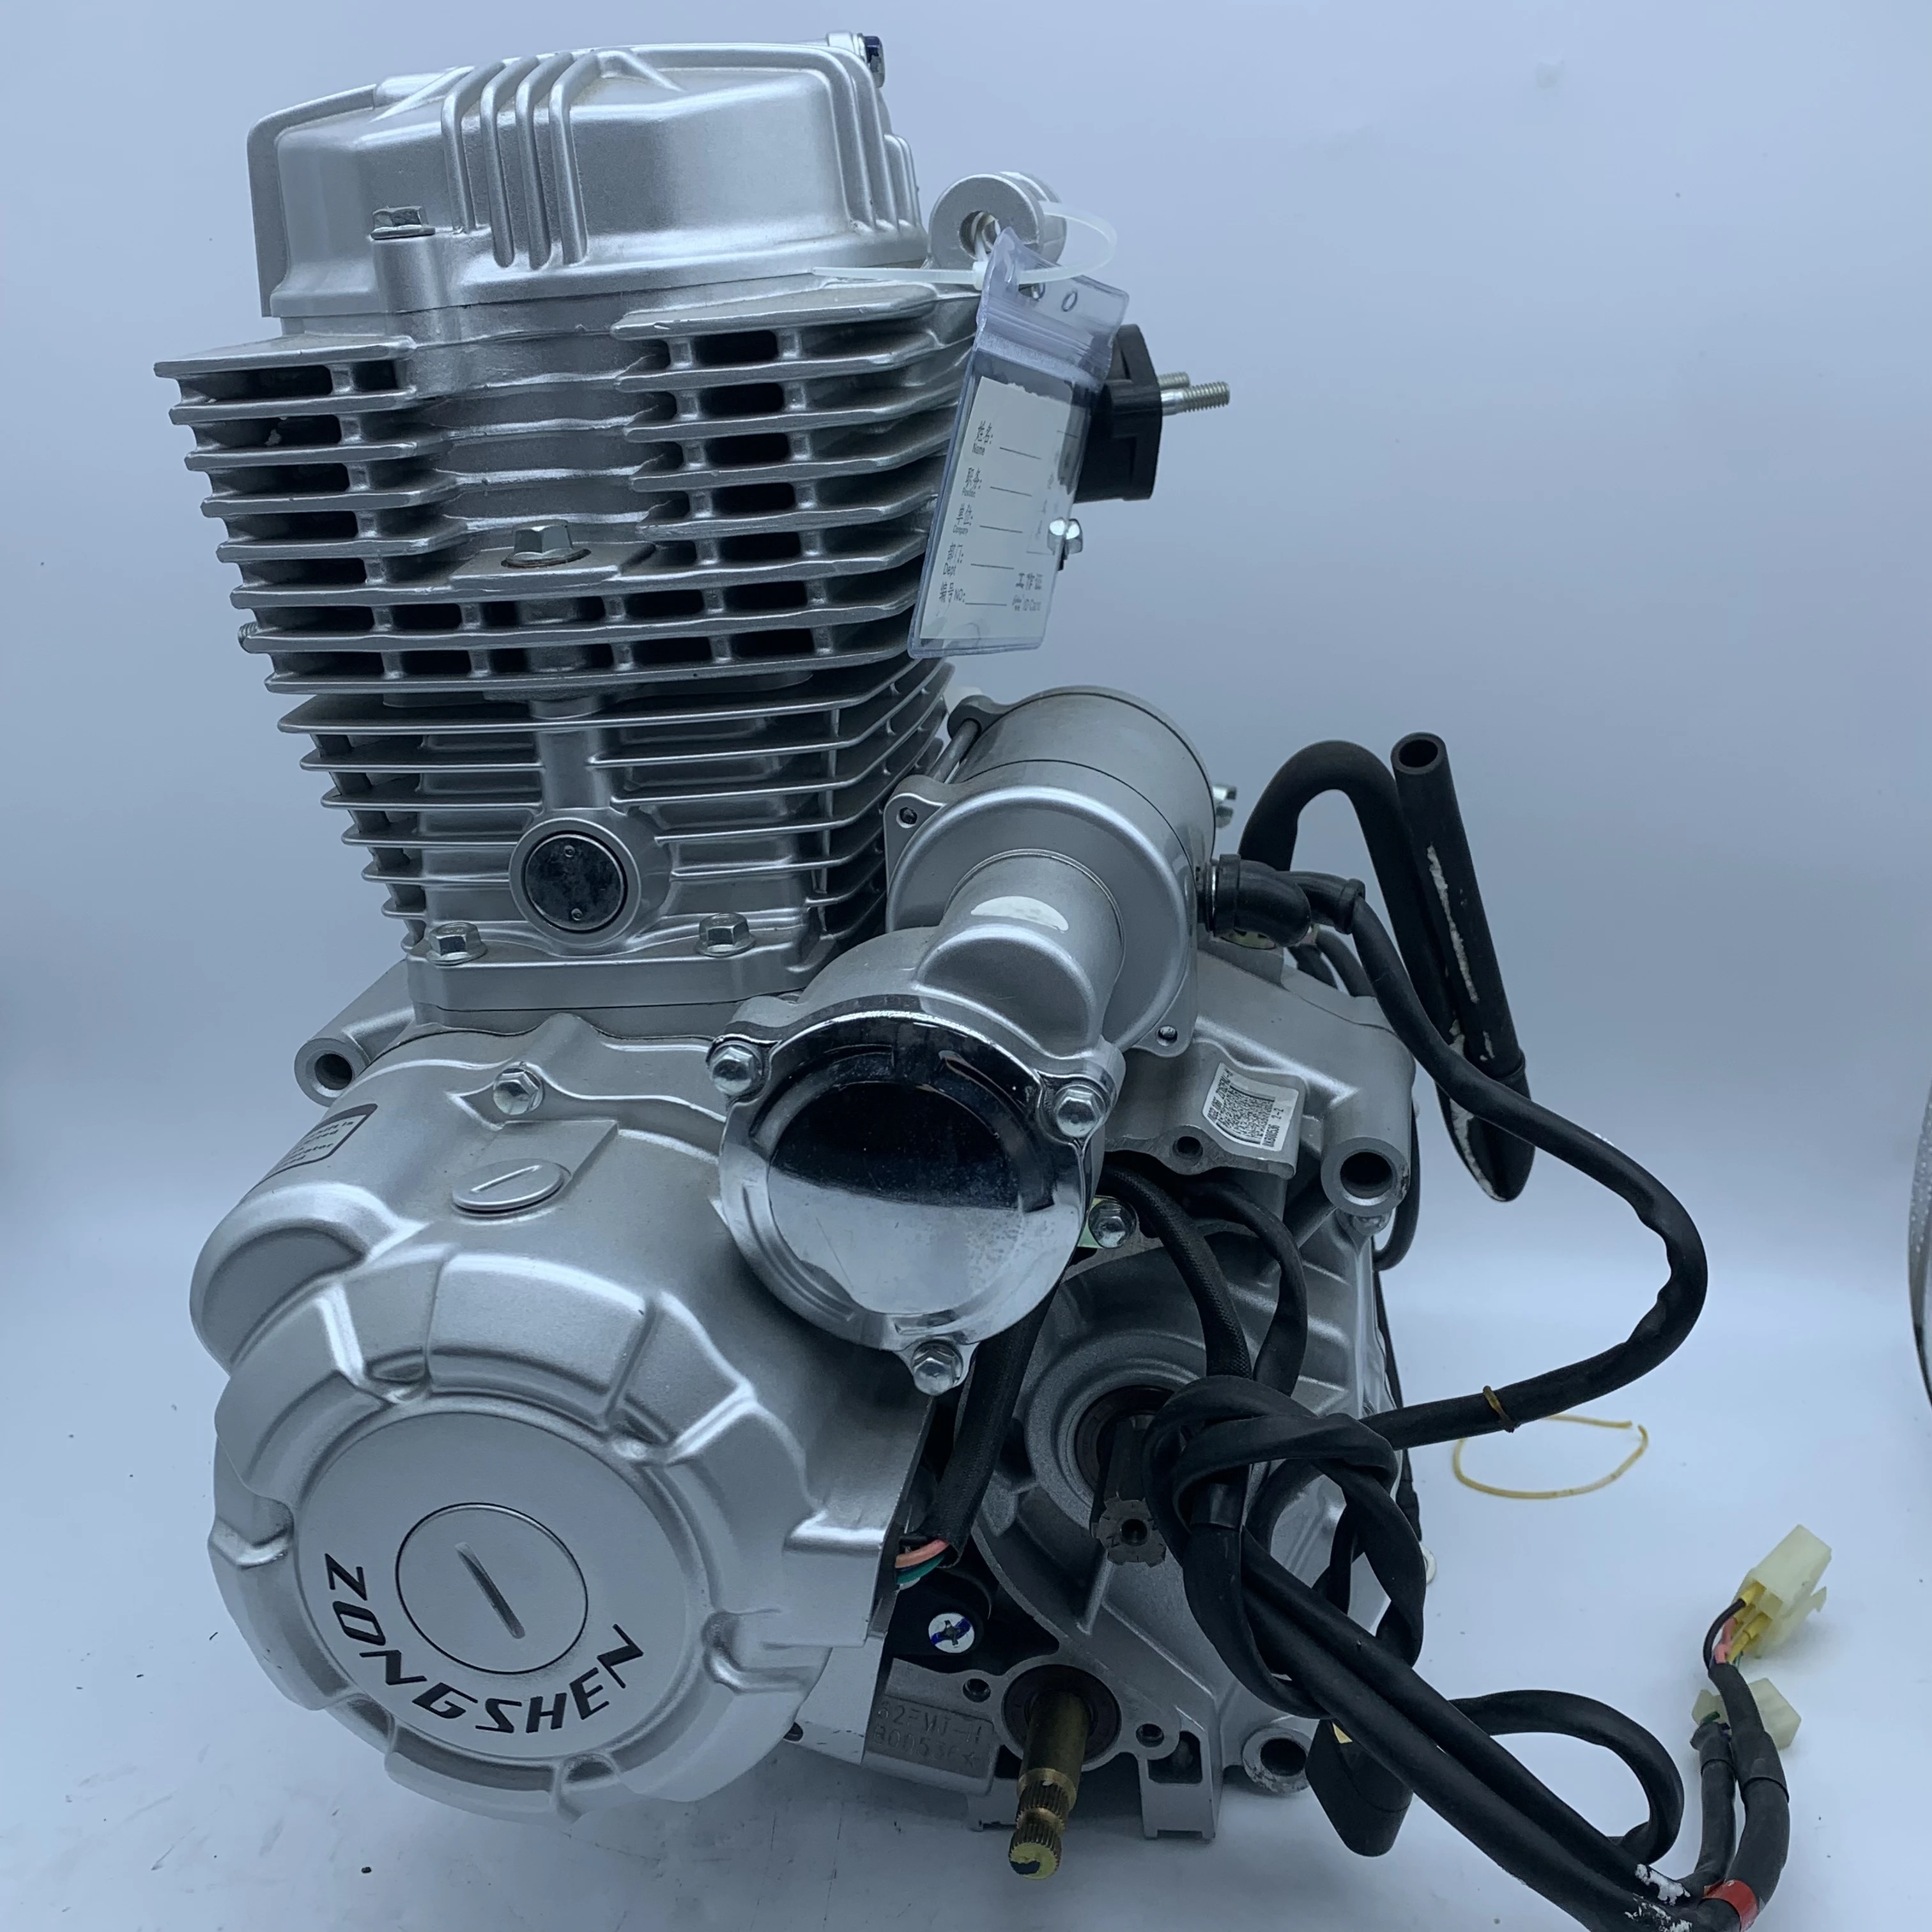 OEM Motorcycle Zongshen 200cc Engine Air-cooled Clutch Assy Engine 